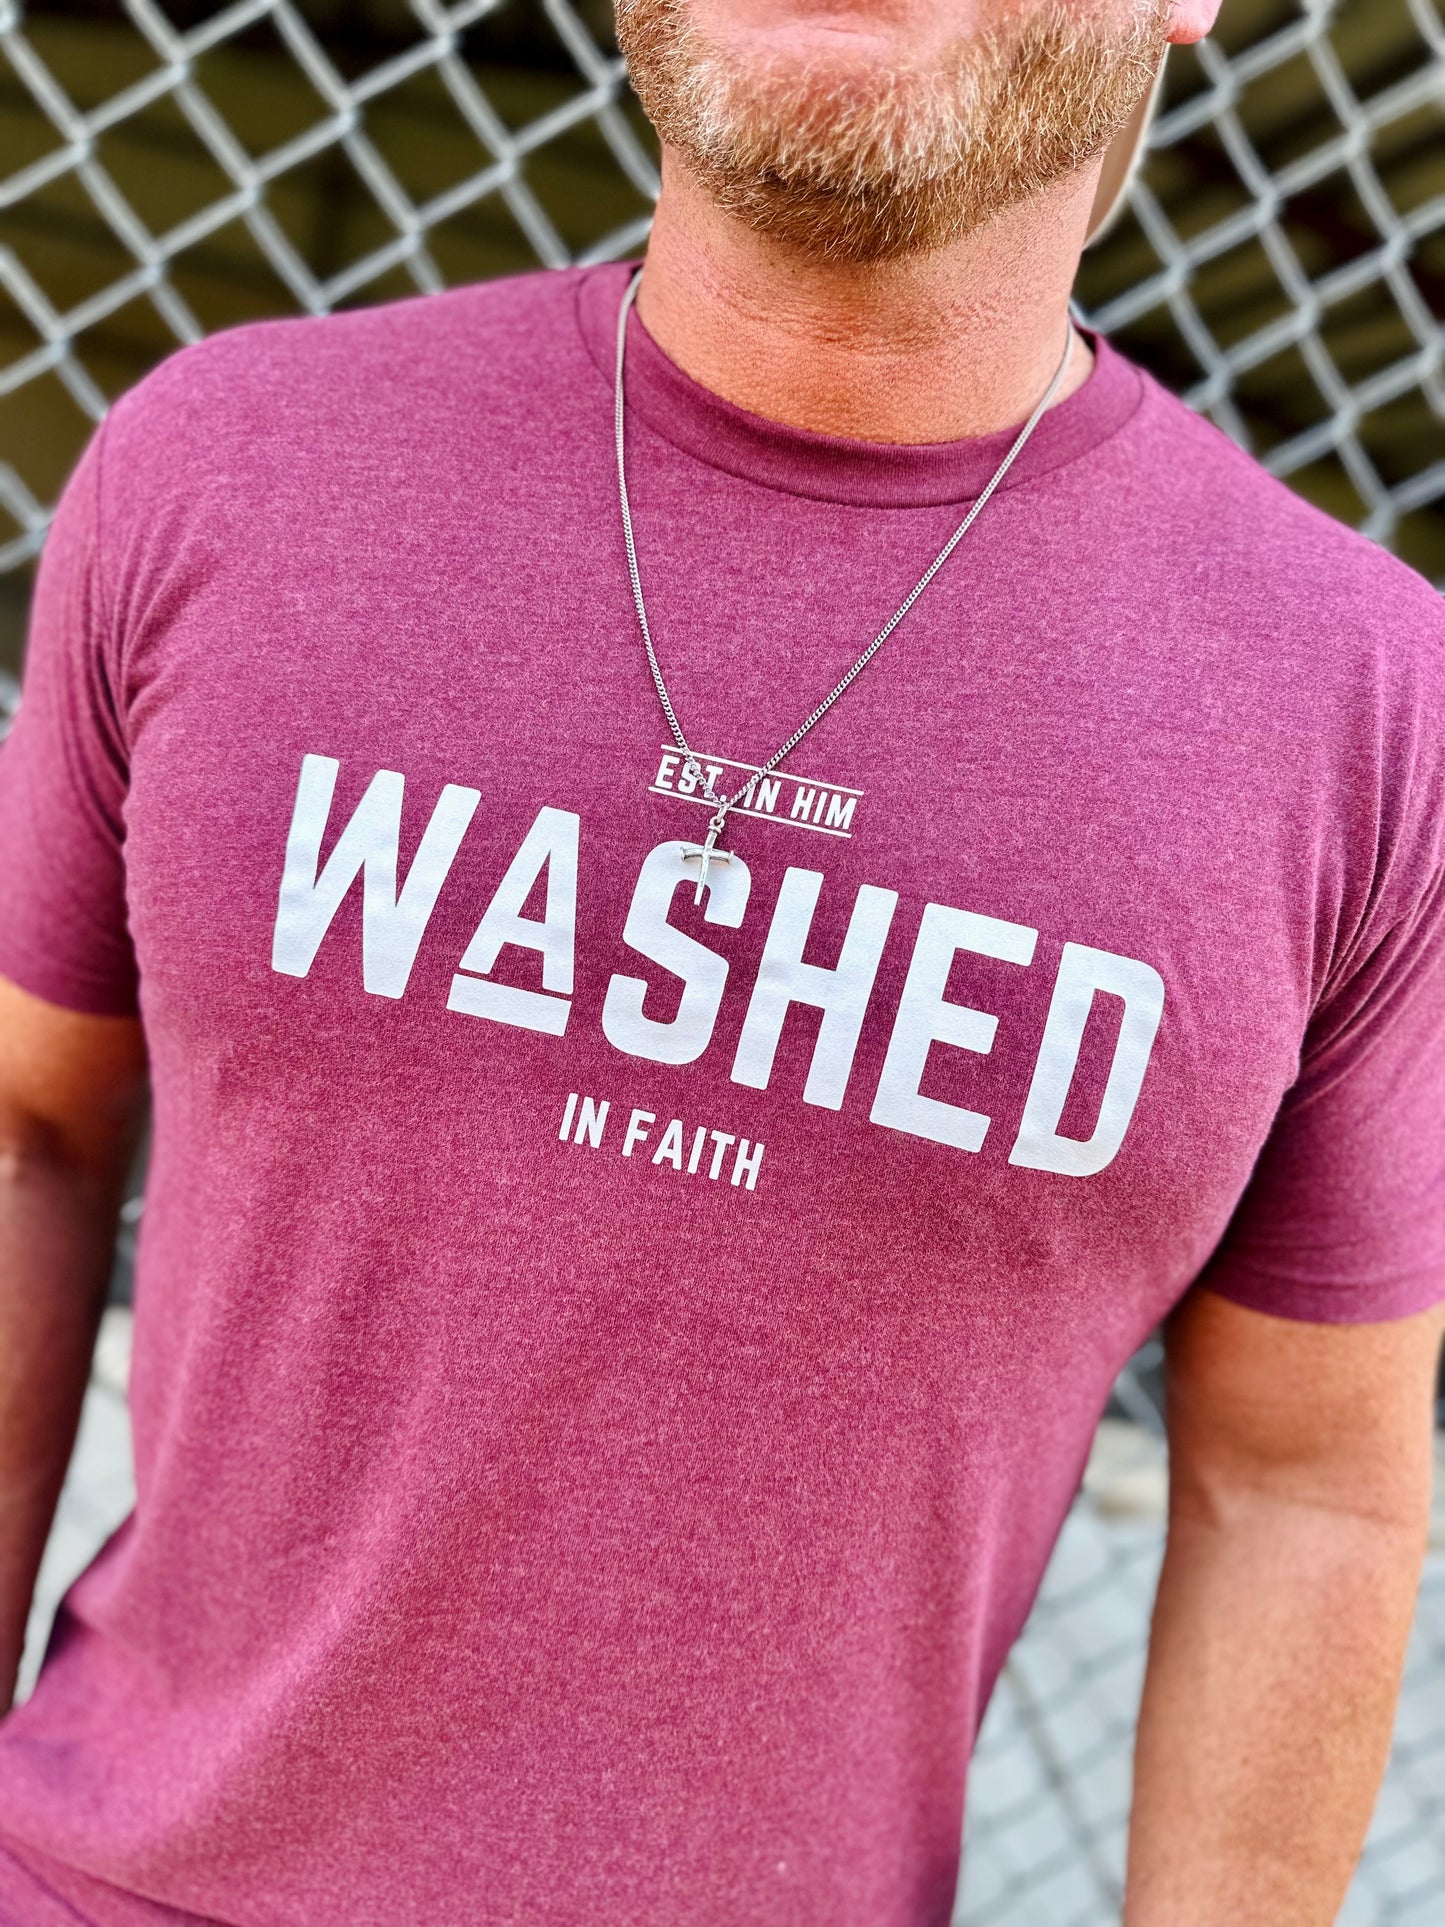 Washed in Faith